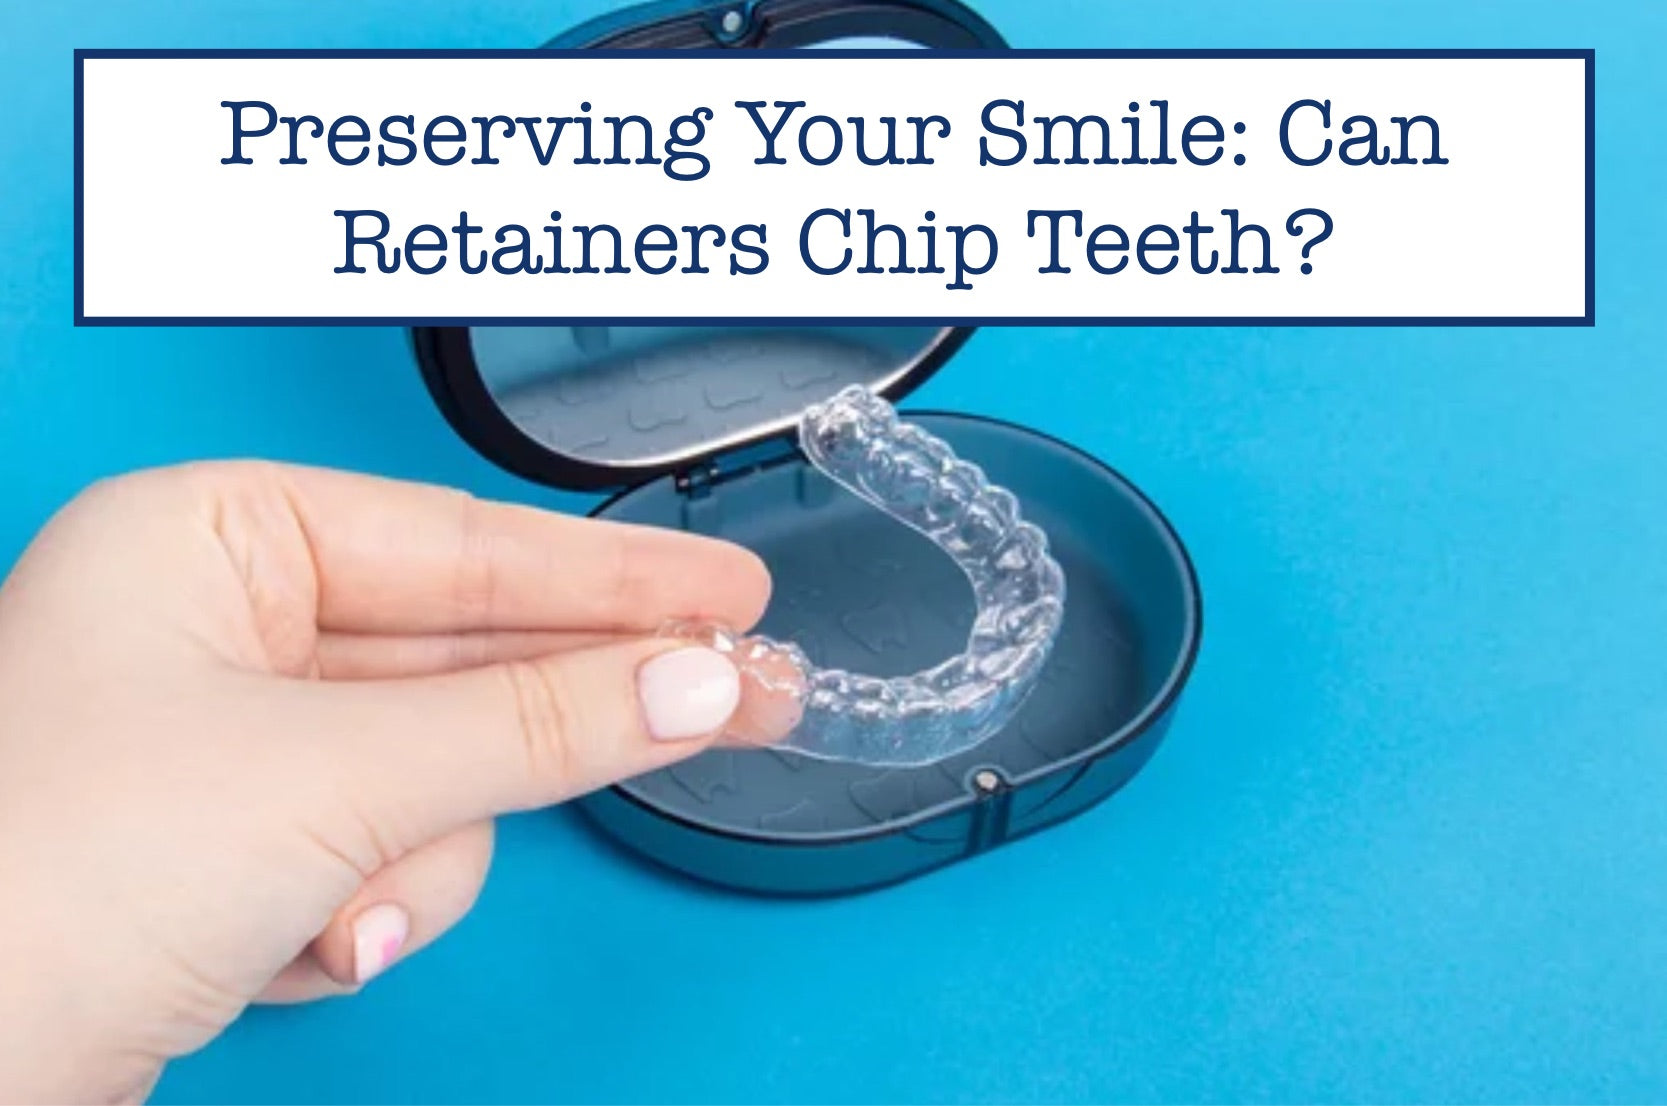 Preserving Your Smile: Can Retainers Chip Teeth?